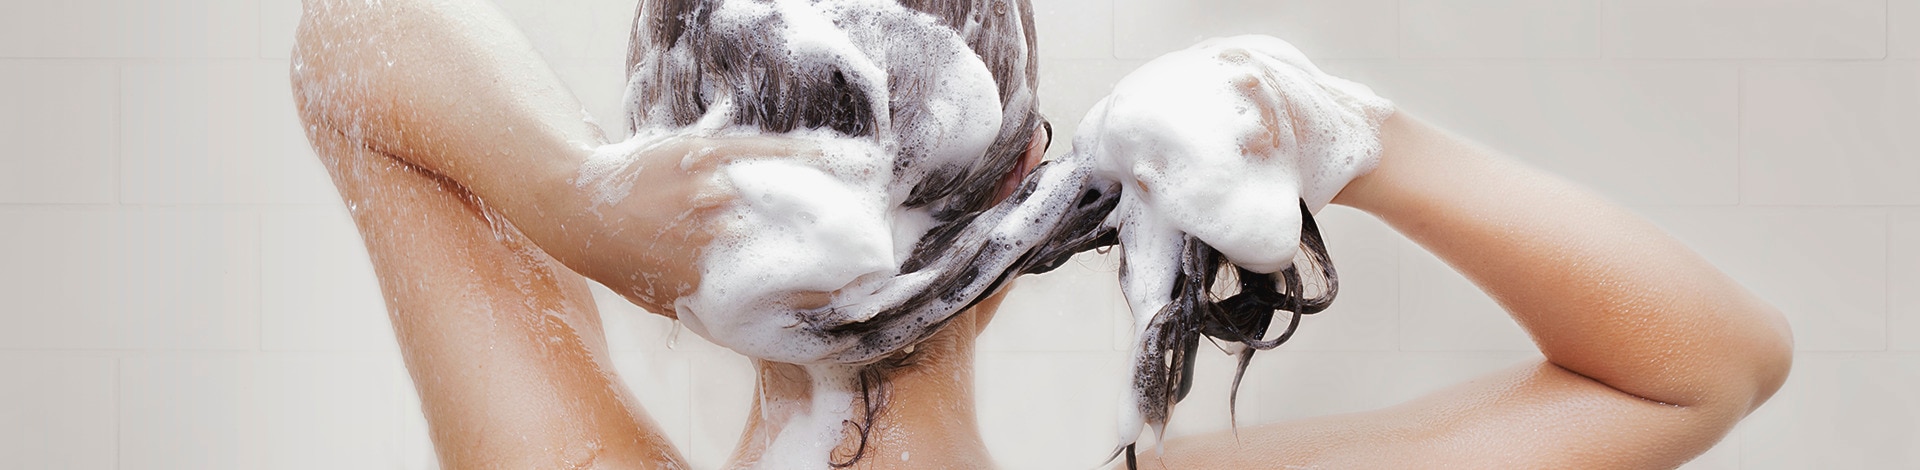 Women lathering hair with shampoo